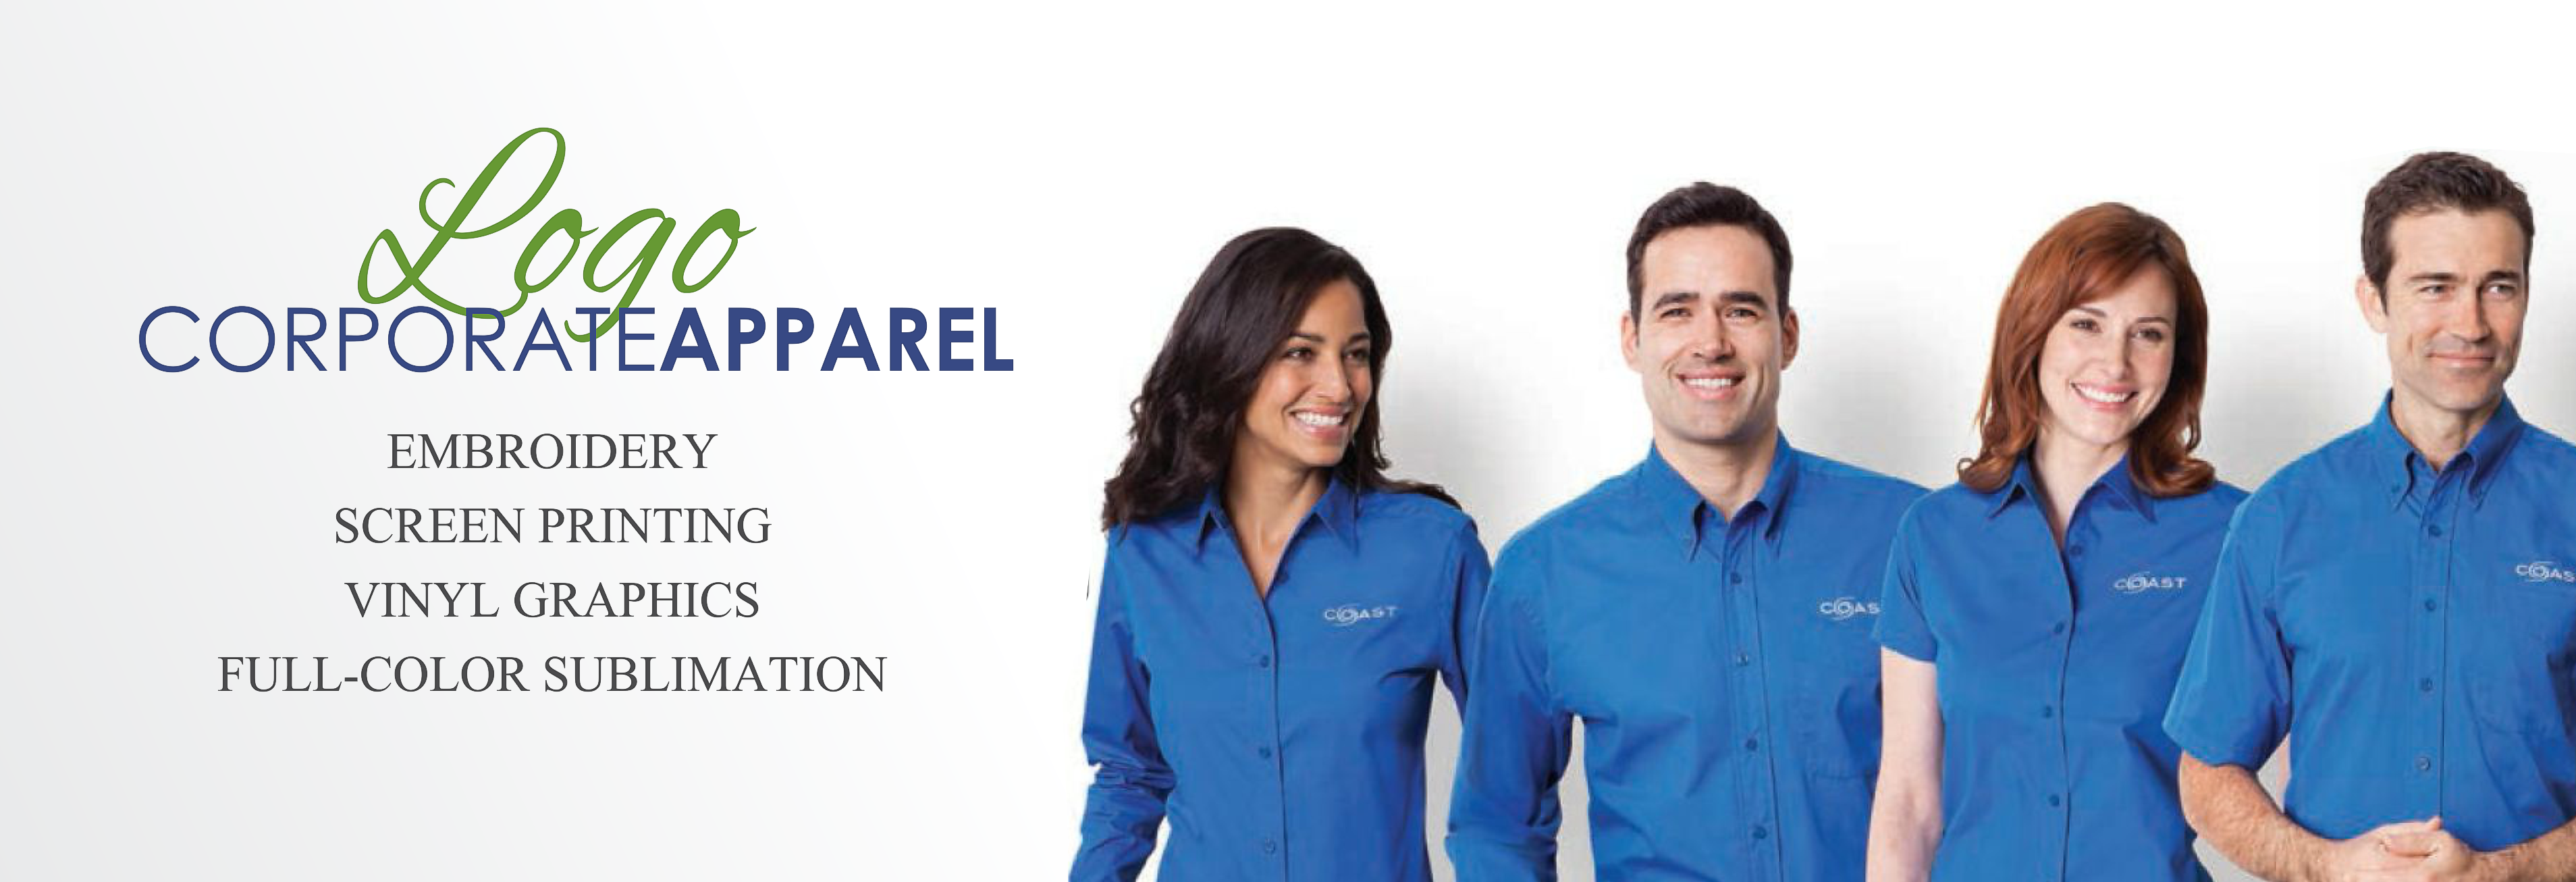 company apparel store for employees company apparel